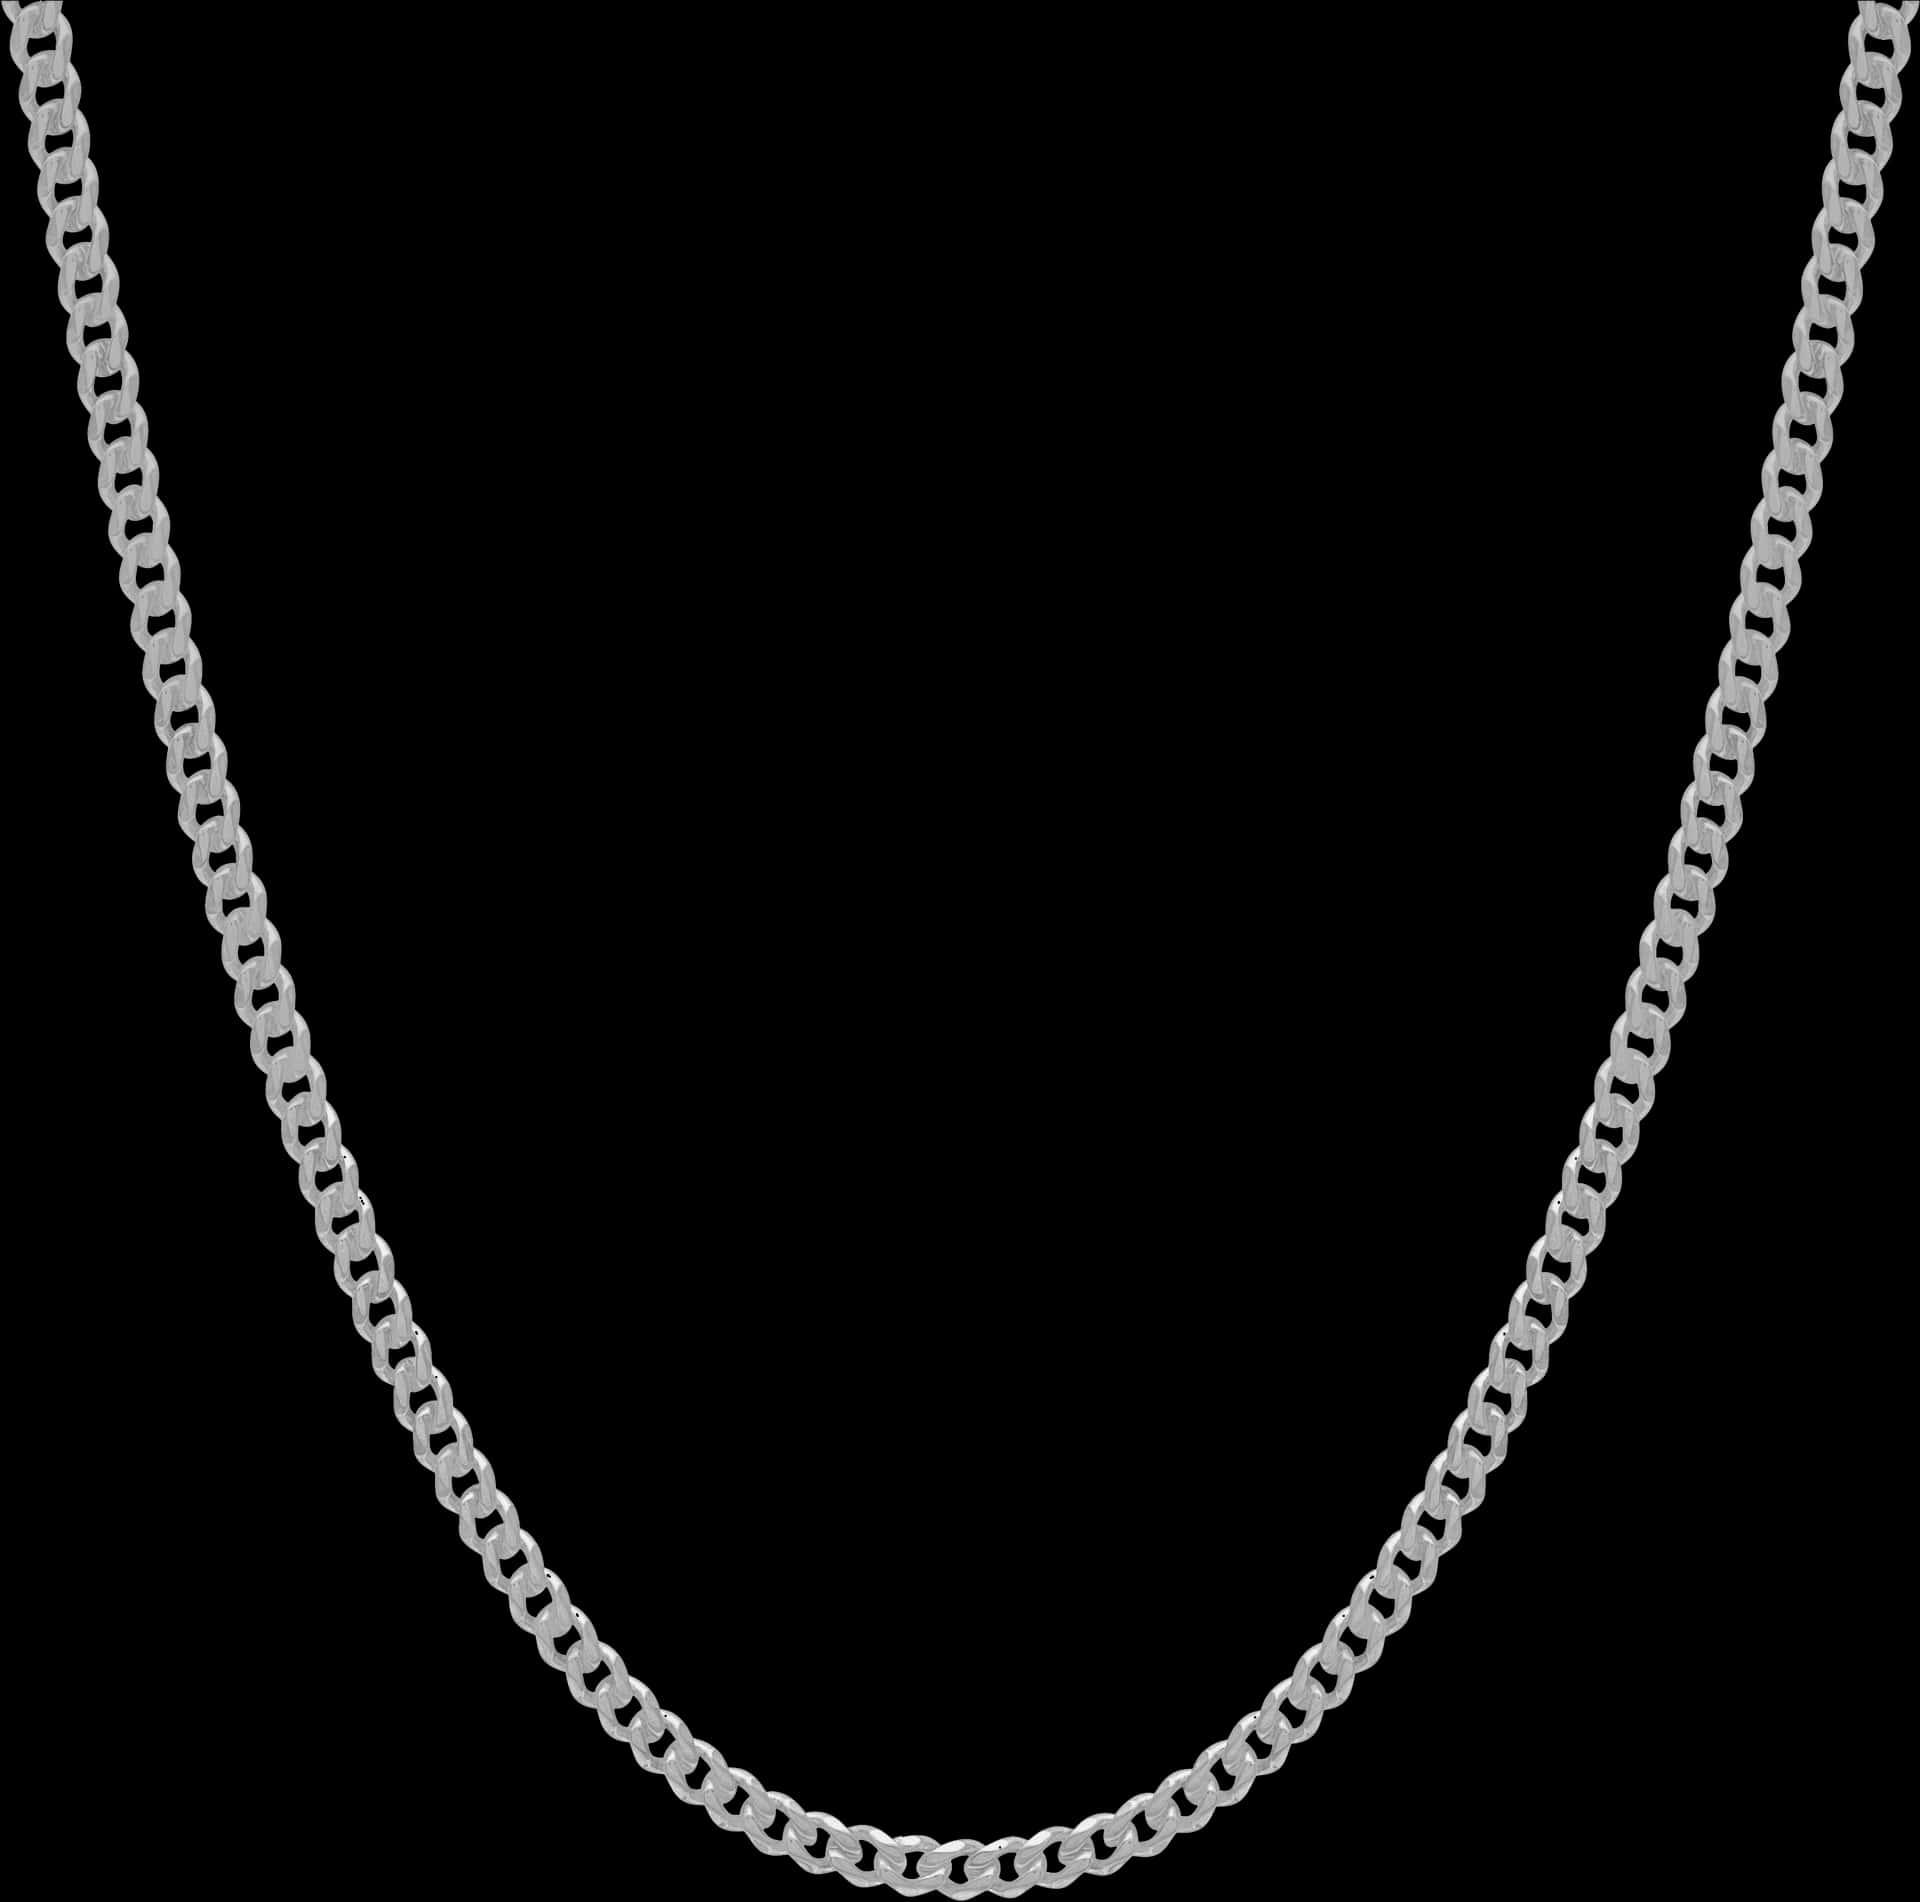 Silver Chain Necklace Black Background PNG